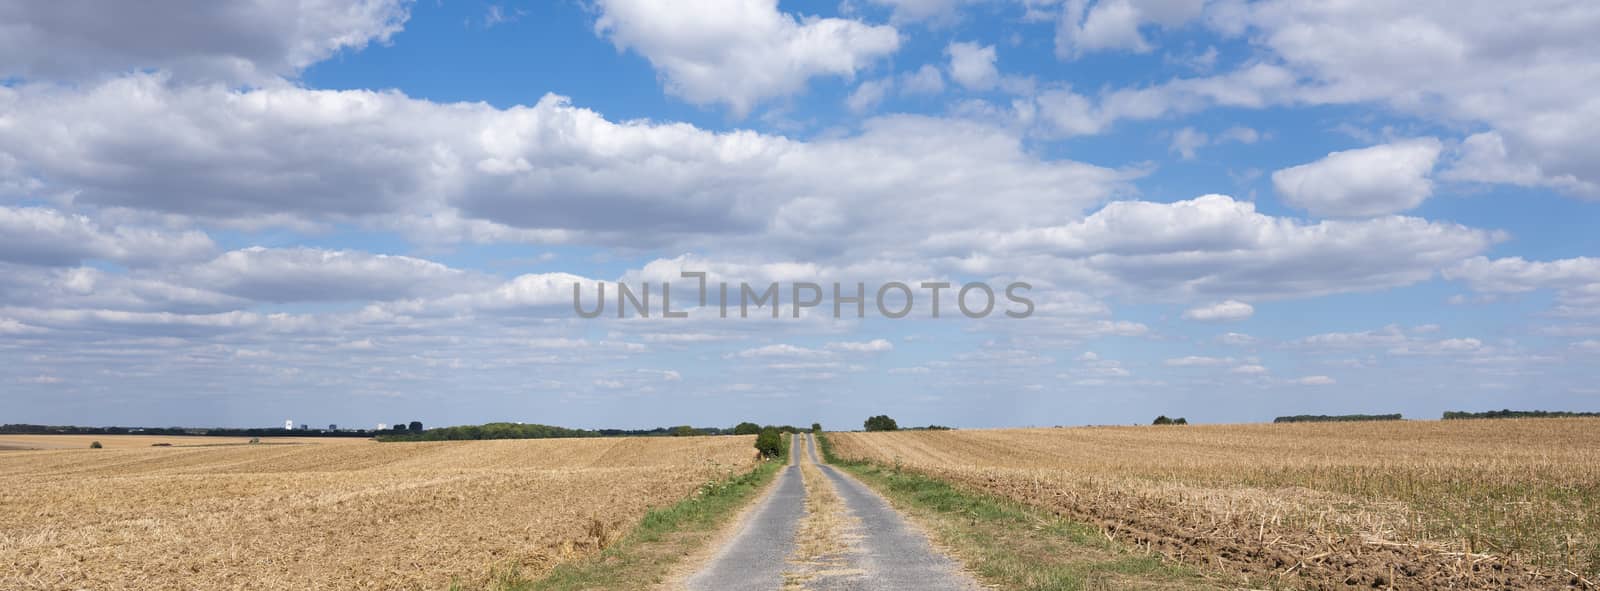 corn fields and country road in the north of france by ahavelaar